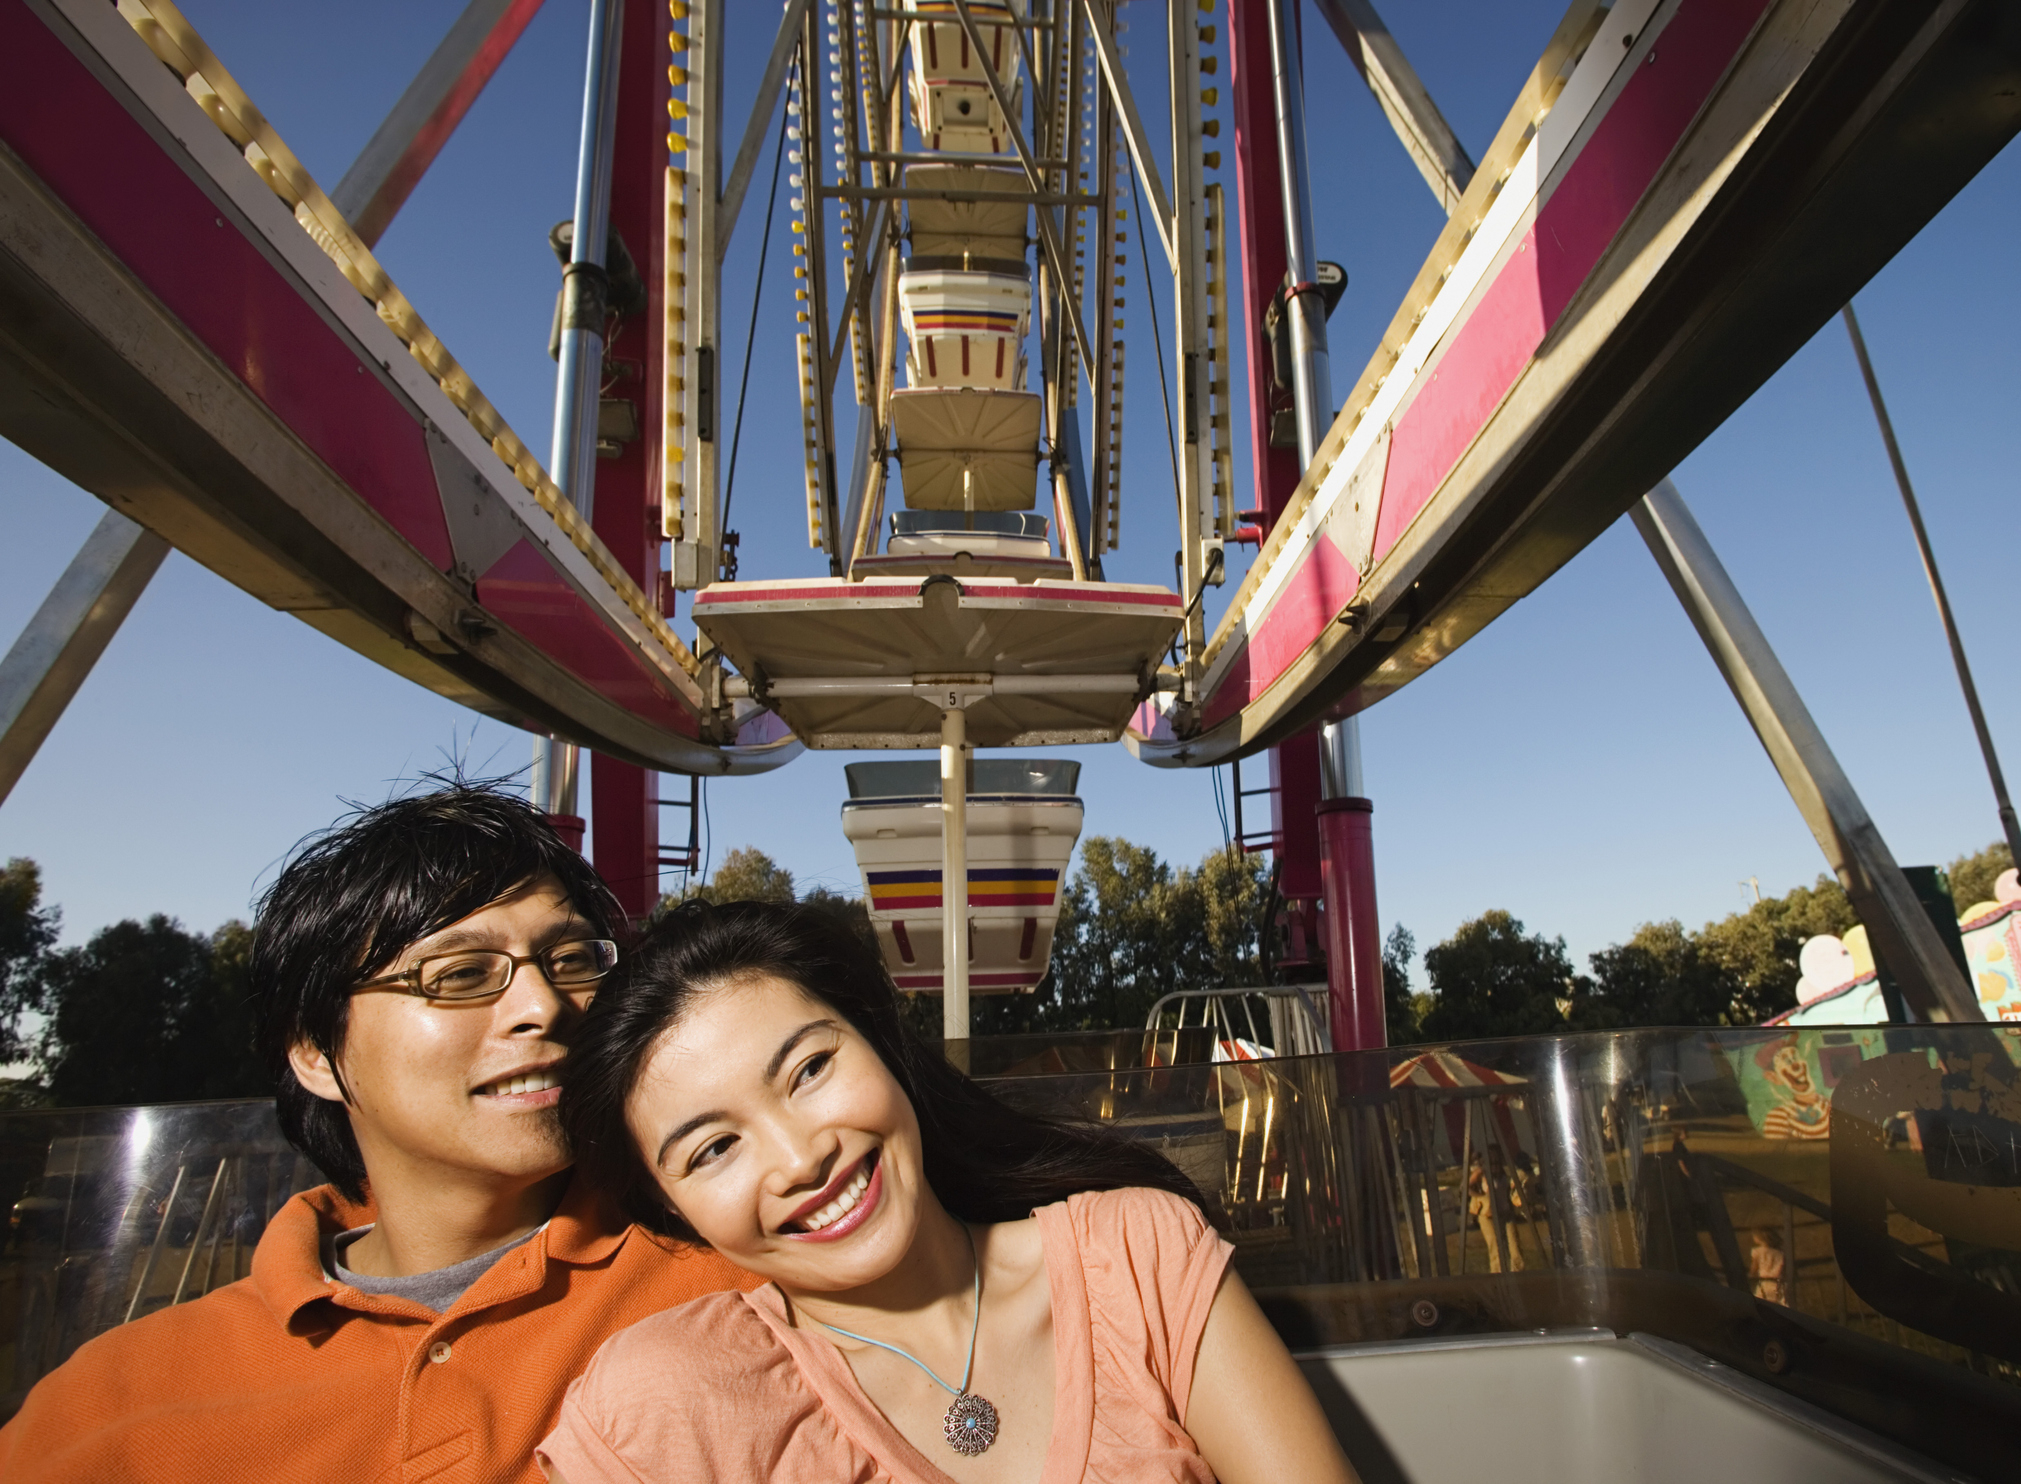 Couple smiling together on a Ferris wheel